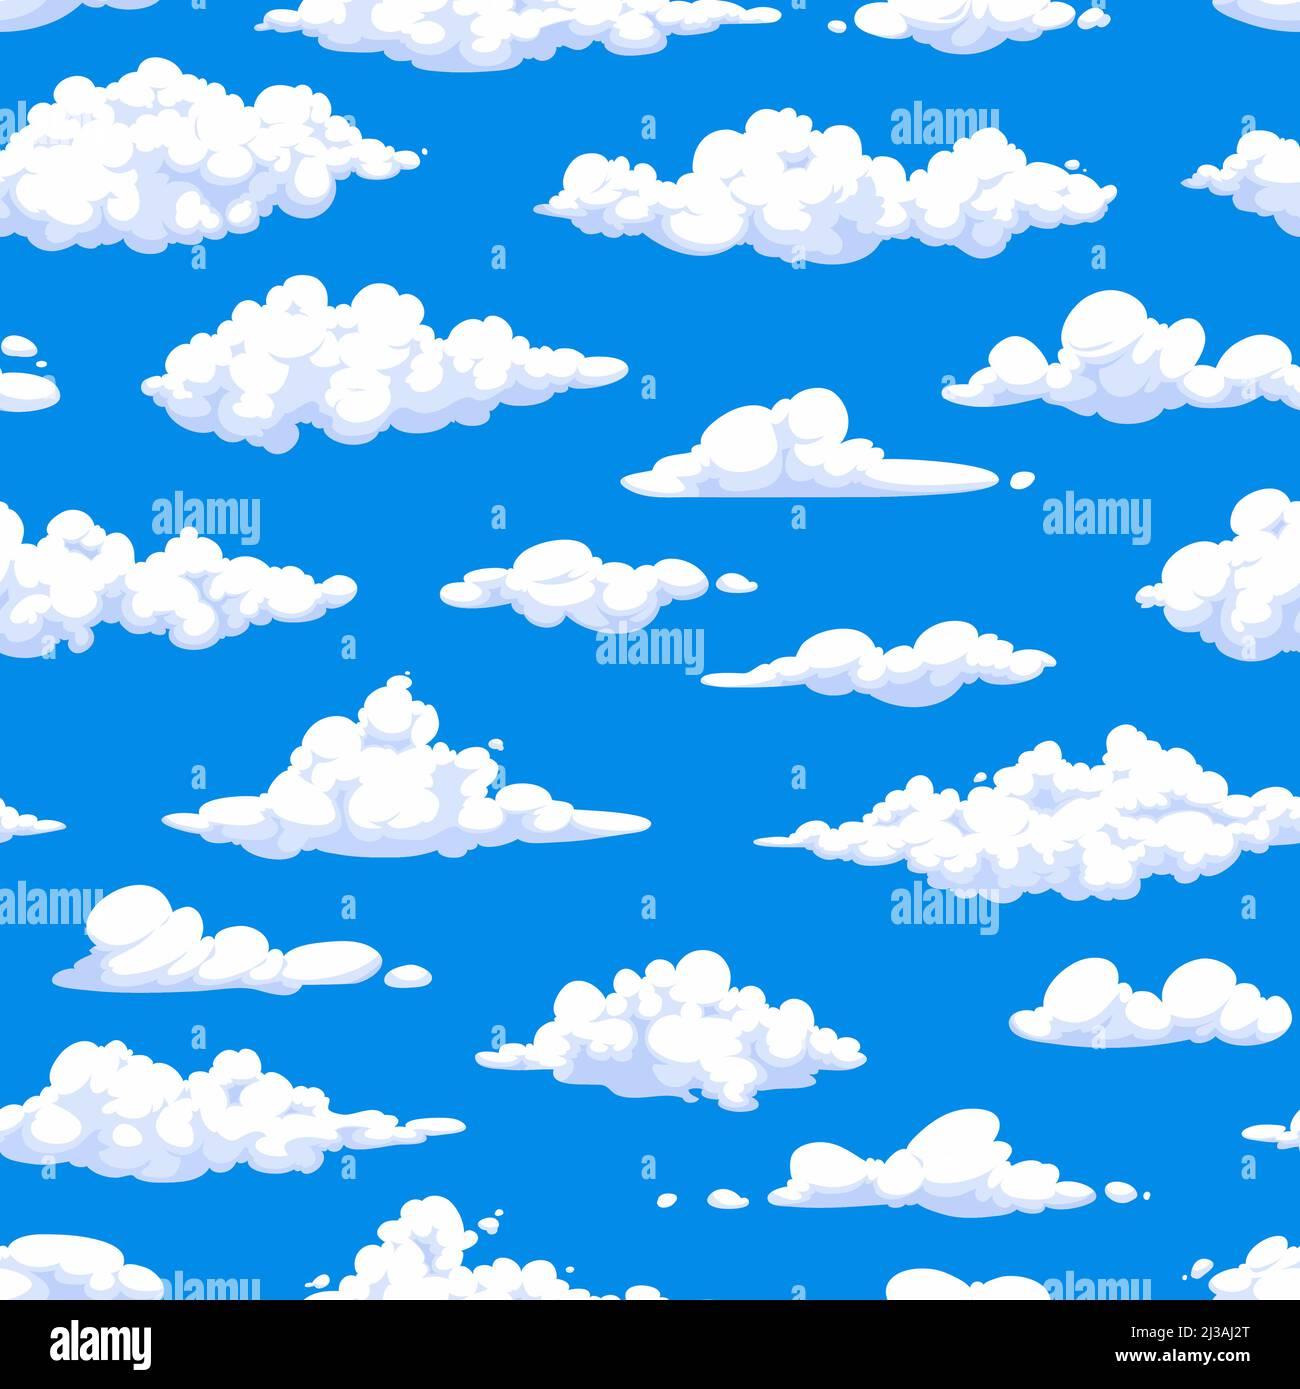 Cartoon Fluffy White Clouds In Blue Sky Seamless Pattern